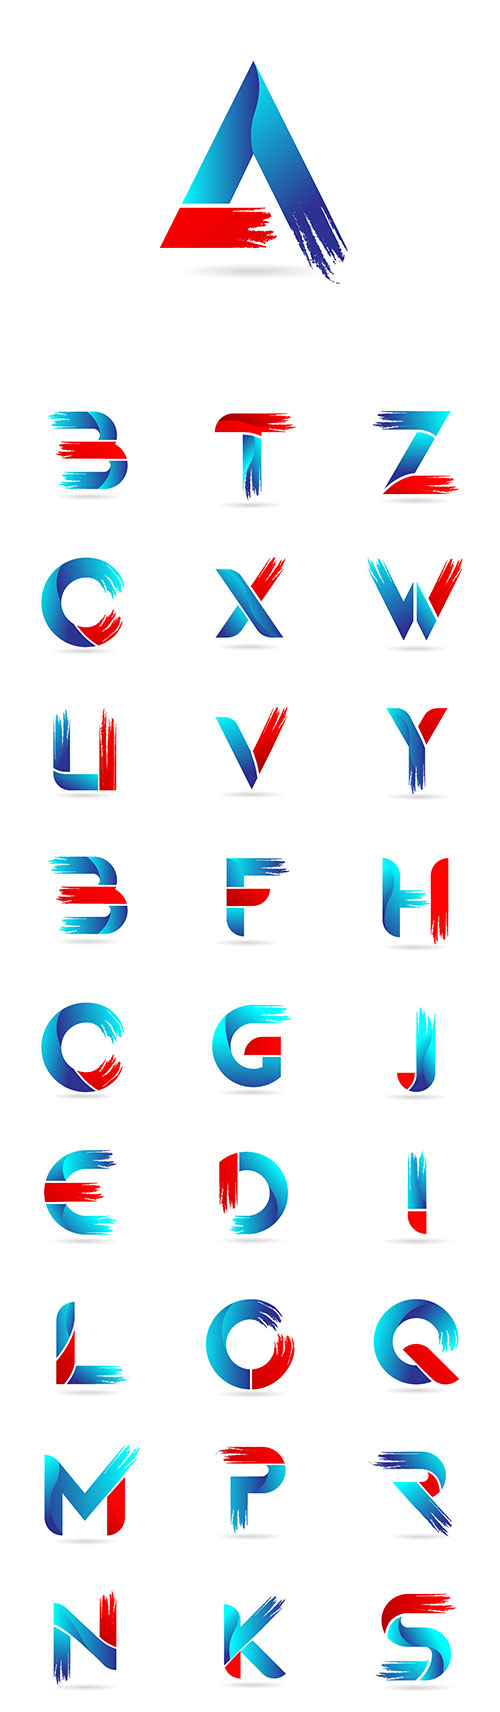 Blue red alphabet letter with grunge brush pattern for company logo icon